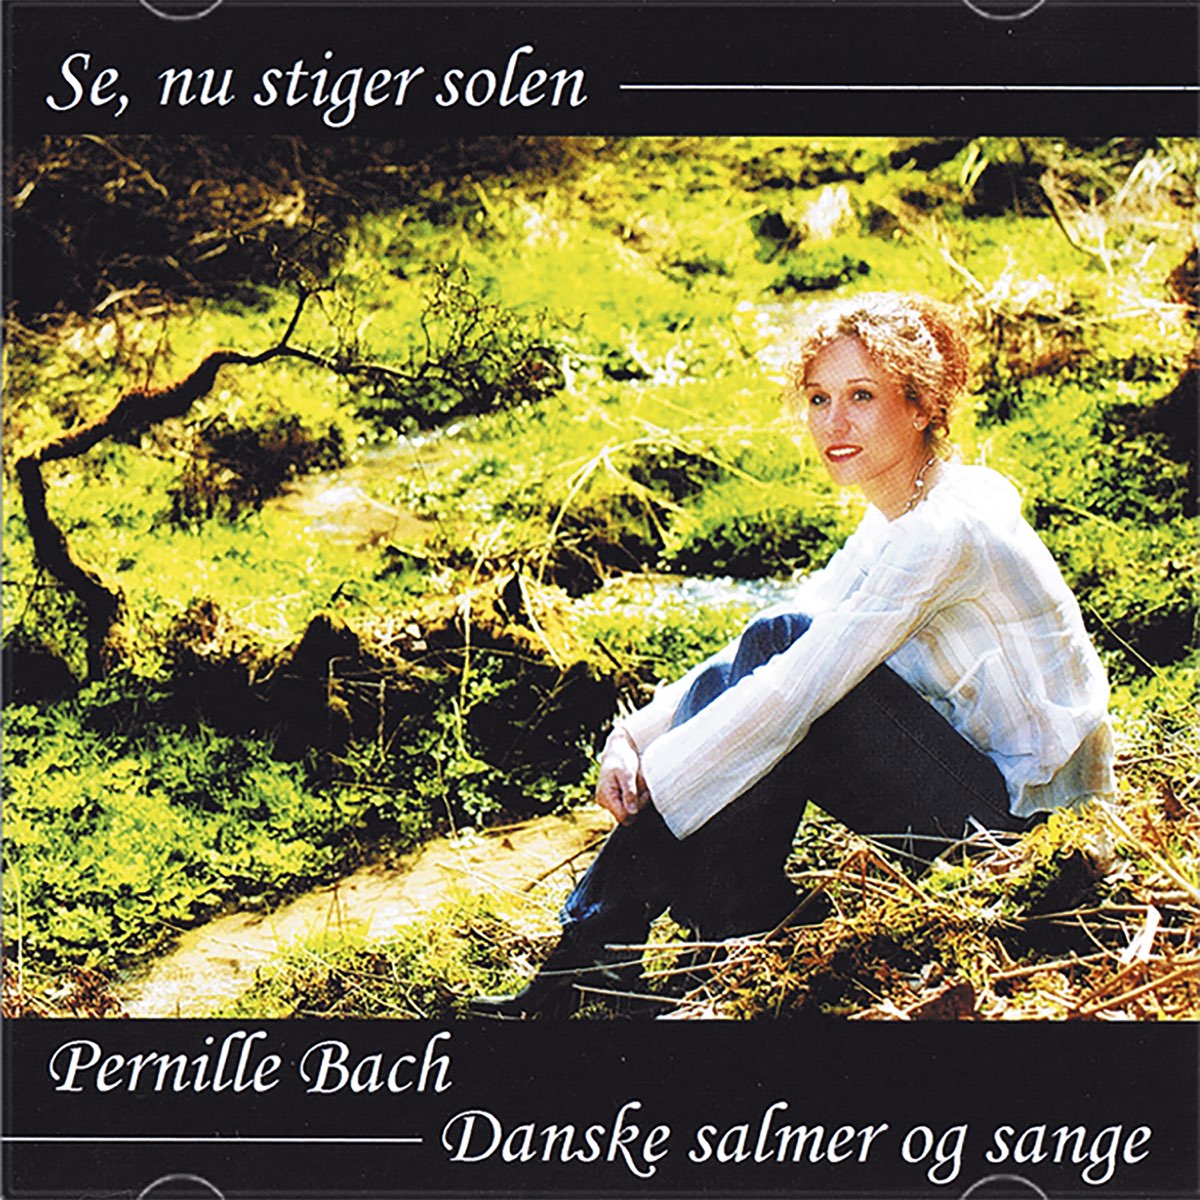 nu stiger solen by Pernille Bach on Apple Music